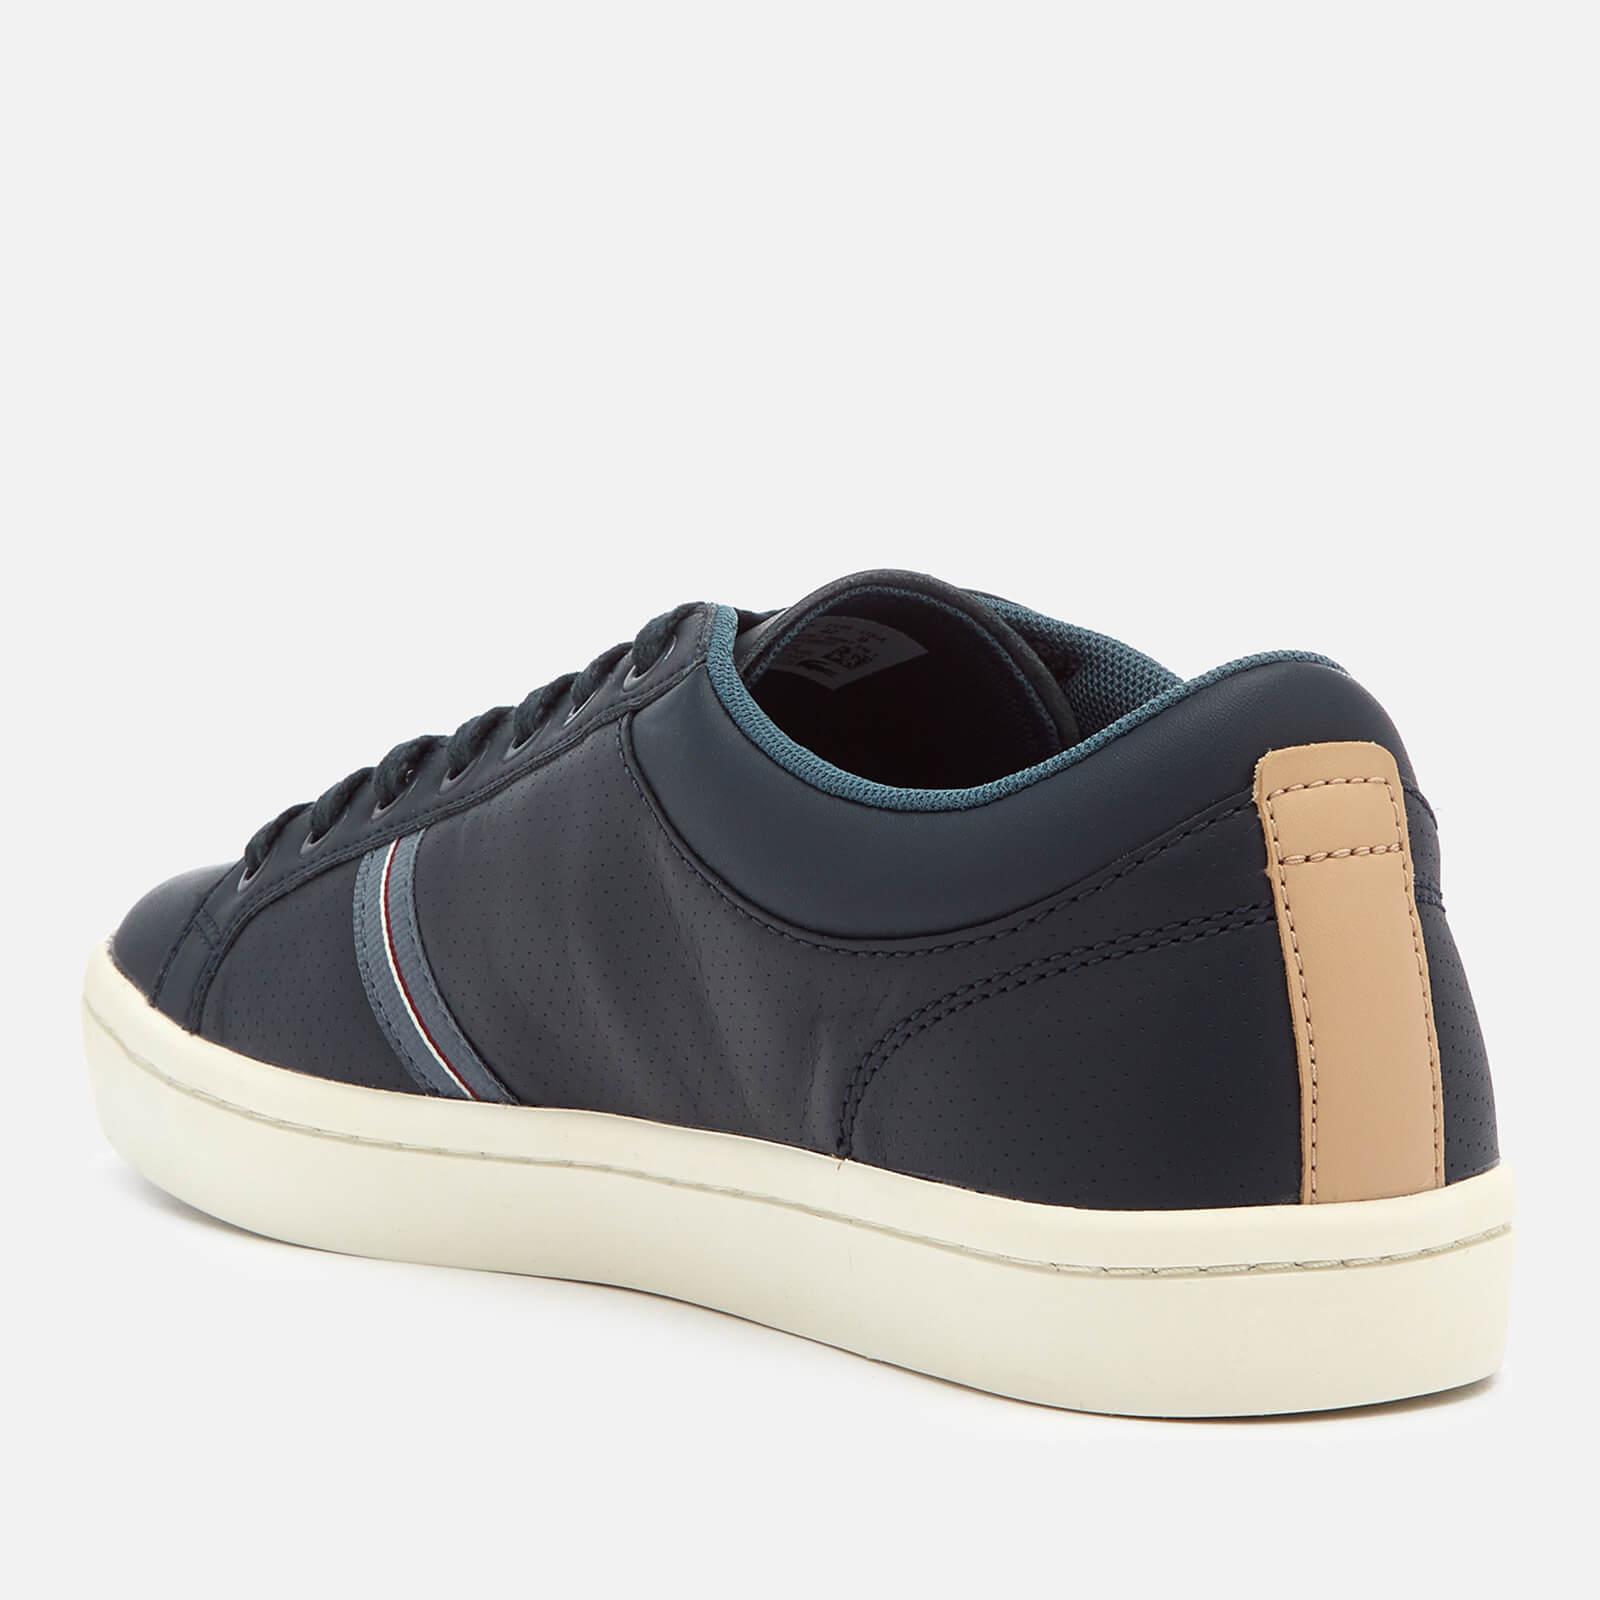 Lacoste Straightset Sport 318 1 Leather 